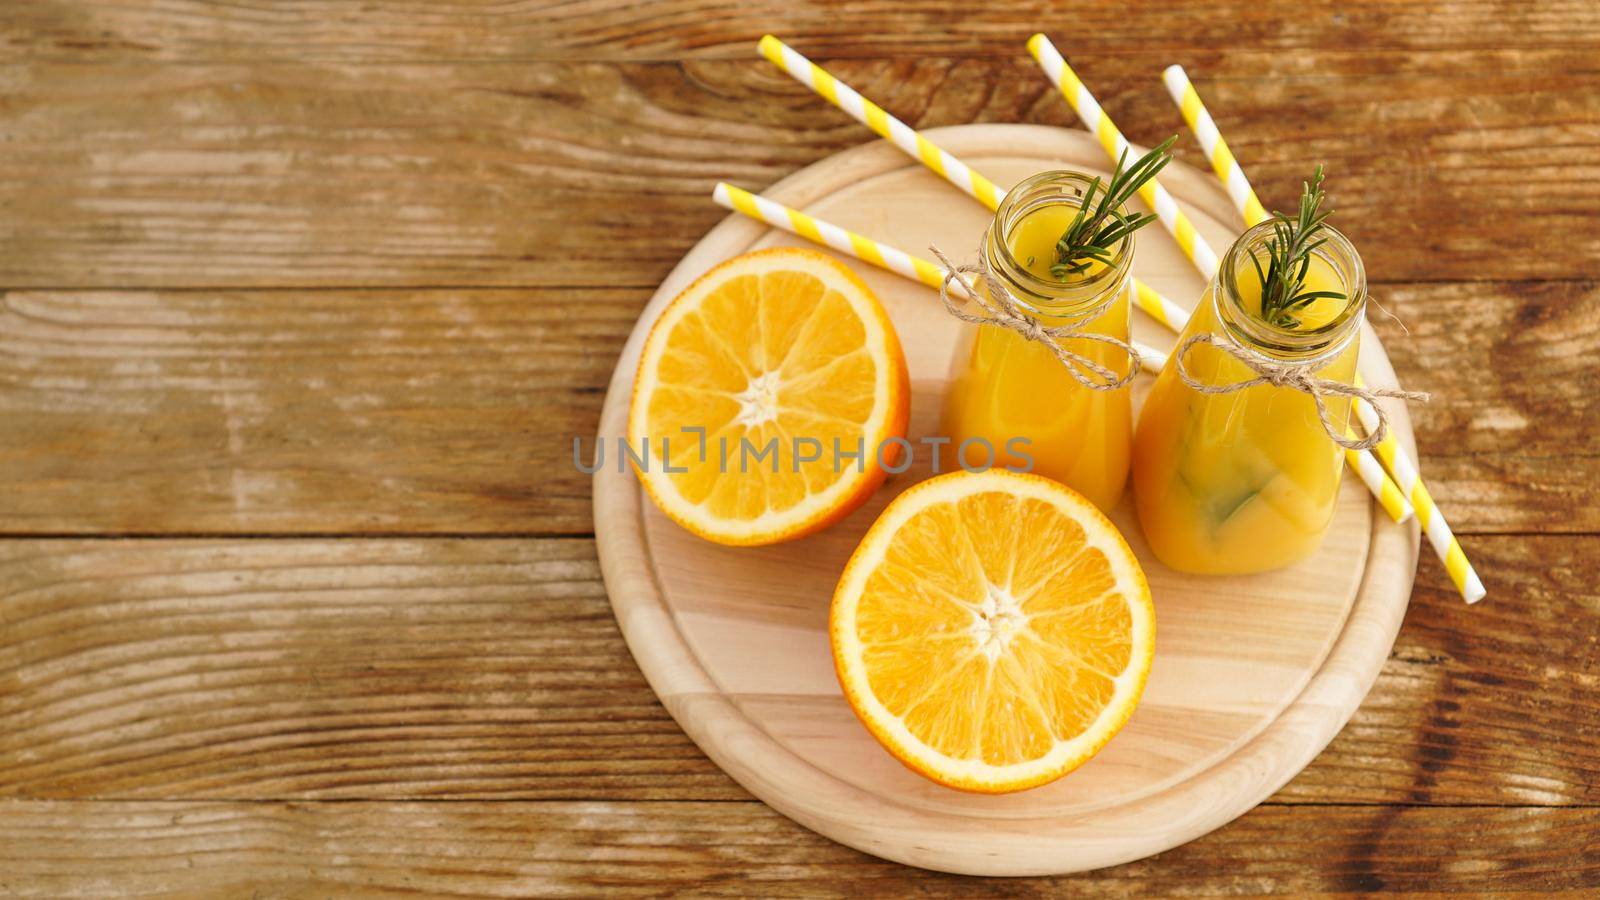 Orange juice in glass bottles. The juice is decorated with a sprig of rosemary. Juice on wooden background